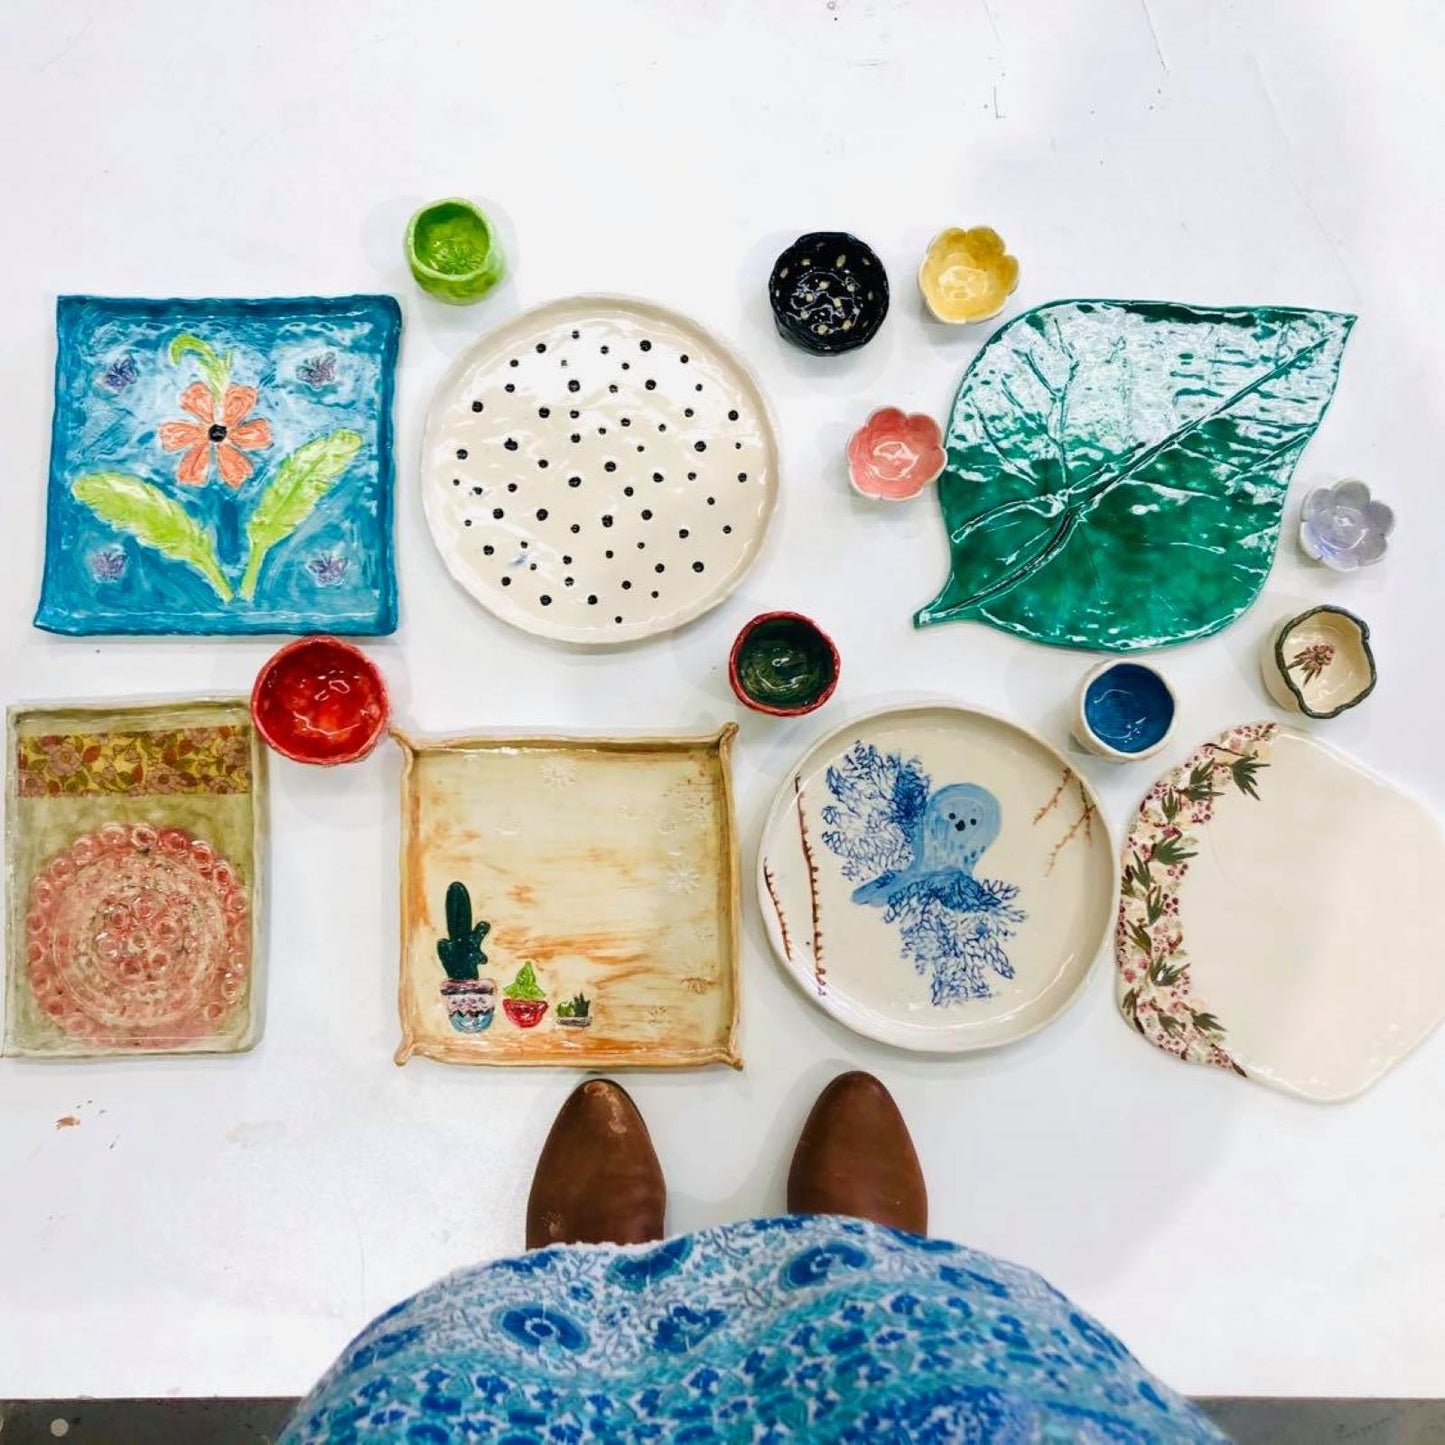 Create you own hand built Pottery Platter and Dip Bowl -  Friday 17th May 6:30-8:30pm